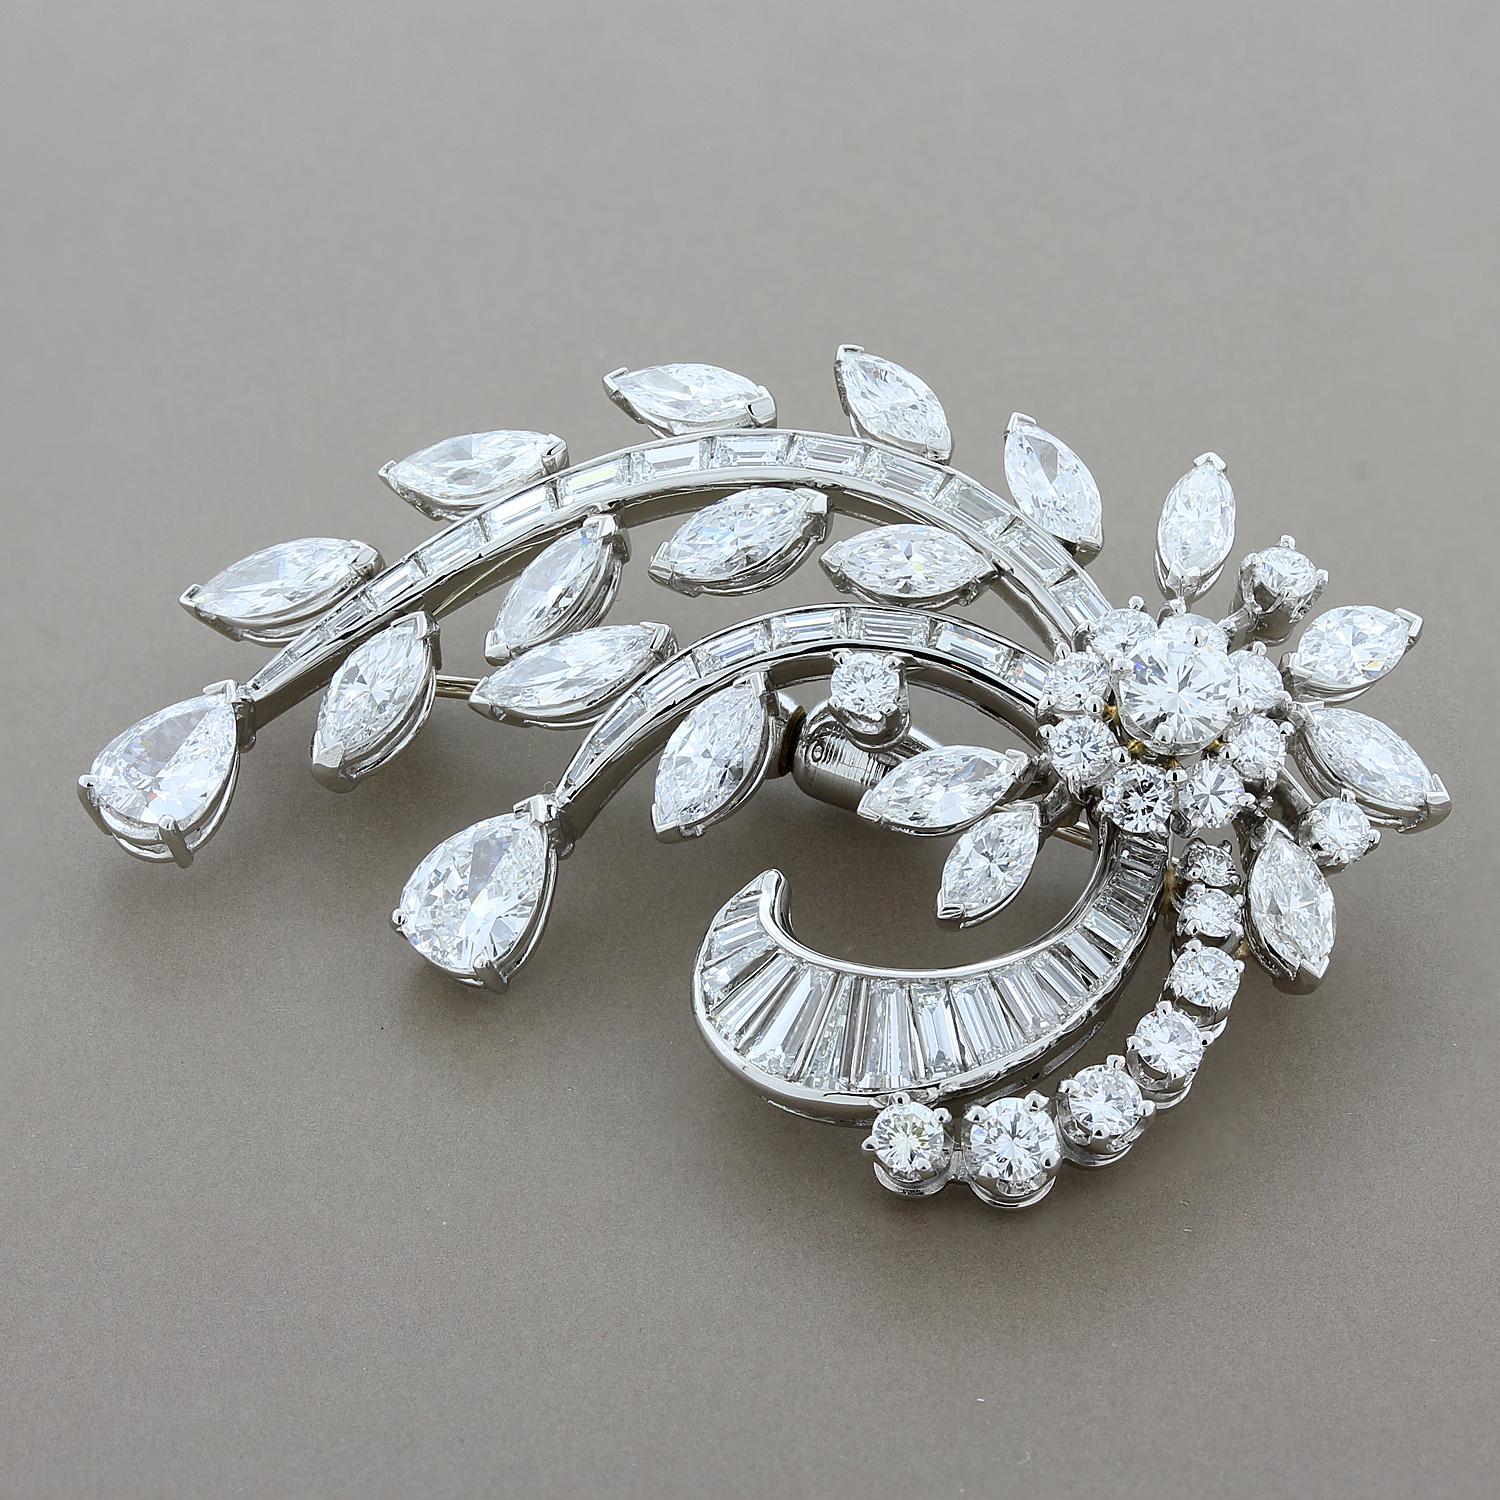 An alluring brooch with a flower cluster and draping leaves made from 9.29 carats of top-grade VS quality white diamonds. Pear cut, round cut, marquise cut and baguette cut diamonds are all used to make this stunning design in platinum.

Brooch